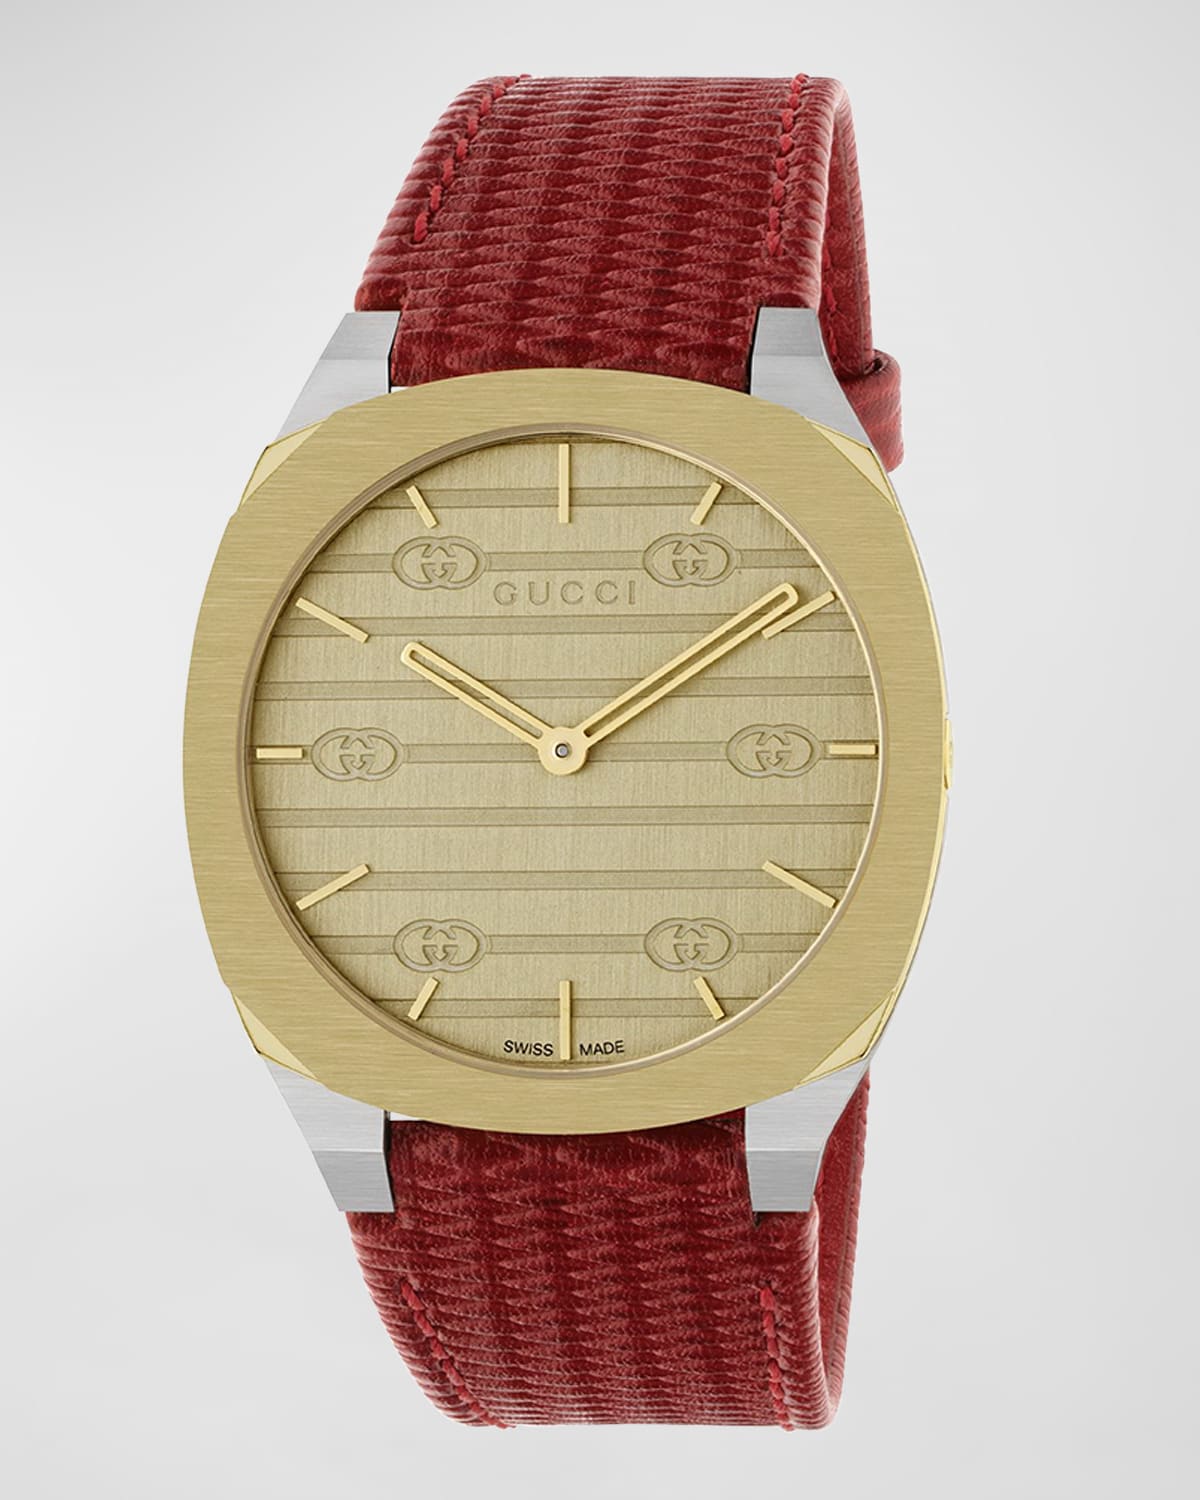 GUCCI 34MM 25H QUARTZ WATCH WITH LEATHER STRAP, RED